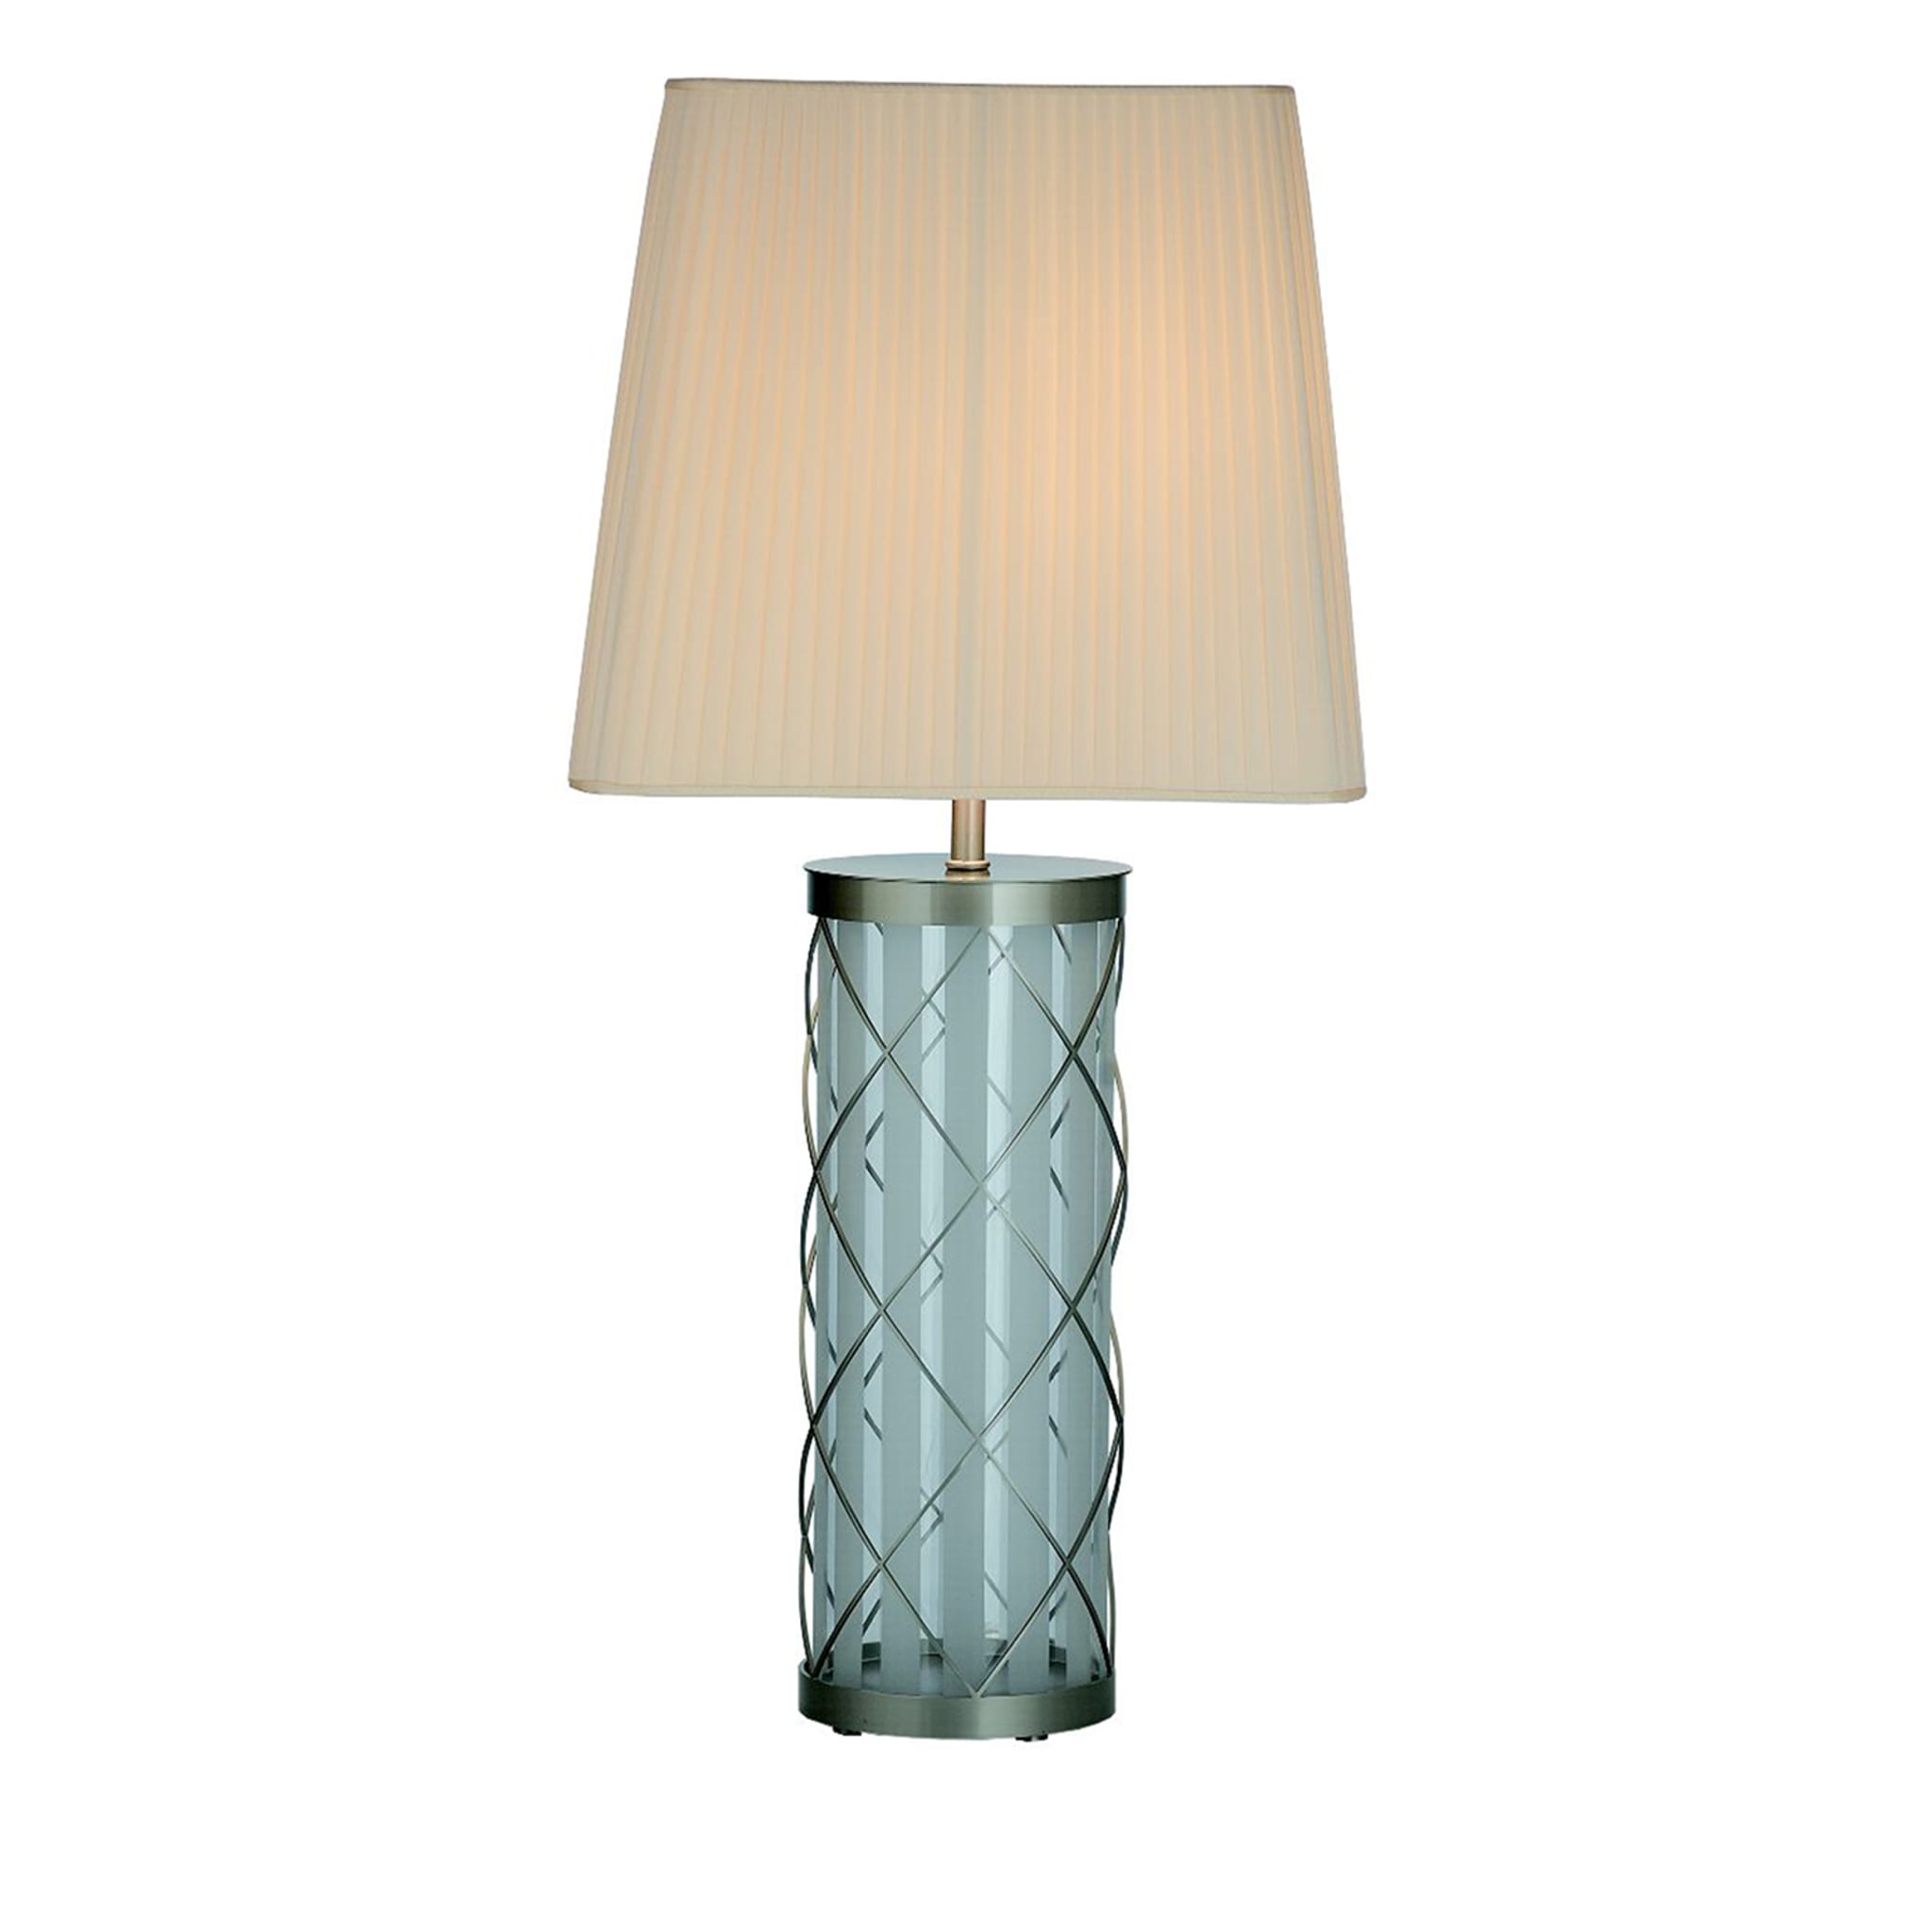 Altea M225 Table Lamp by Elena Carrabs - Main view